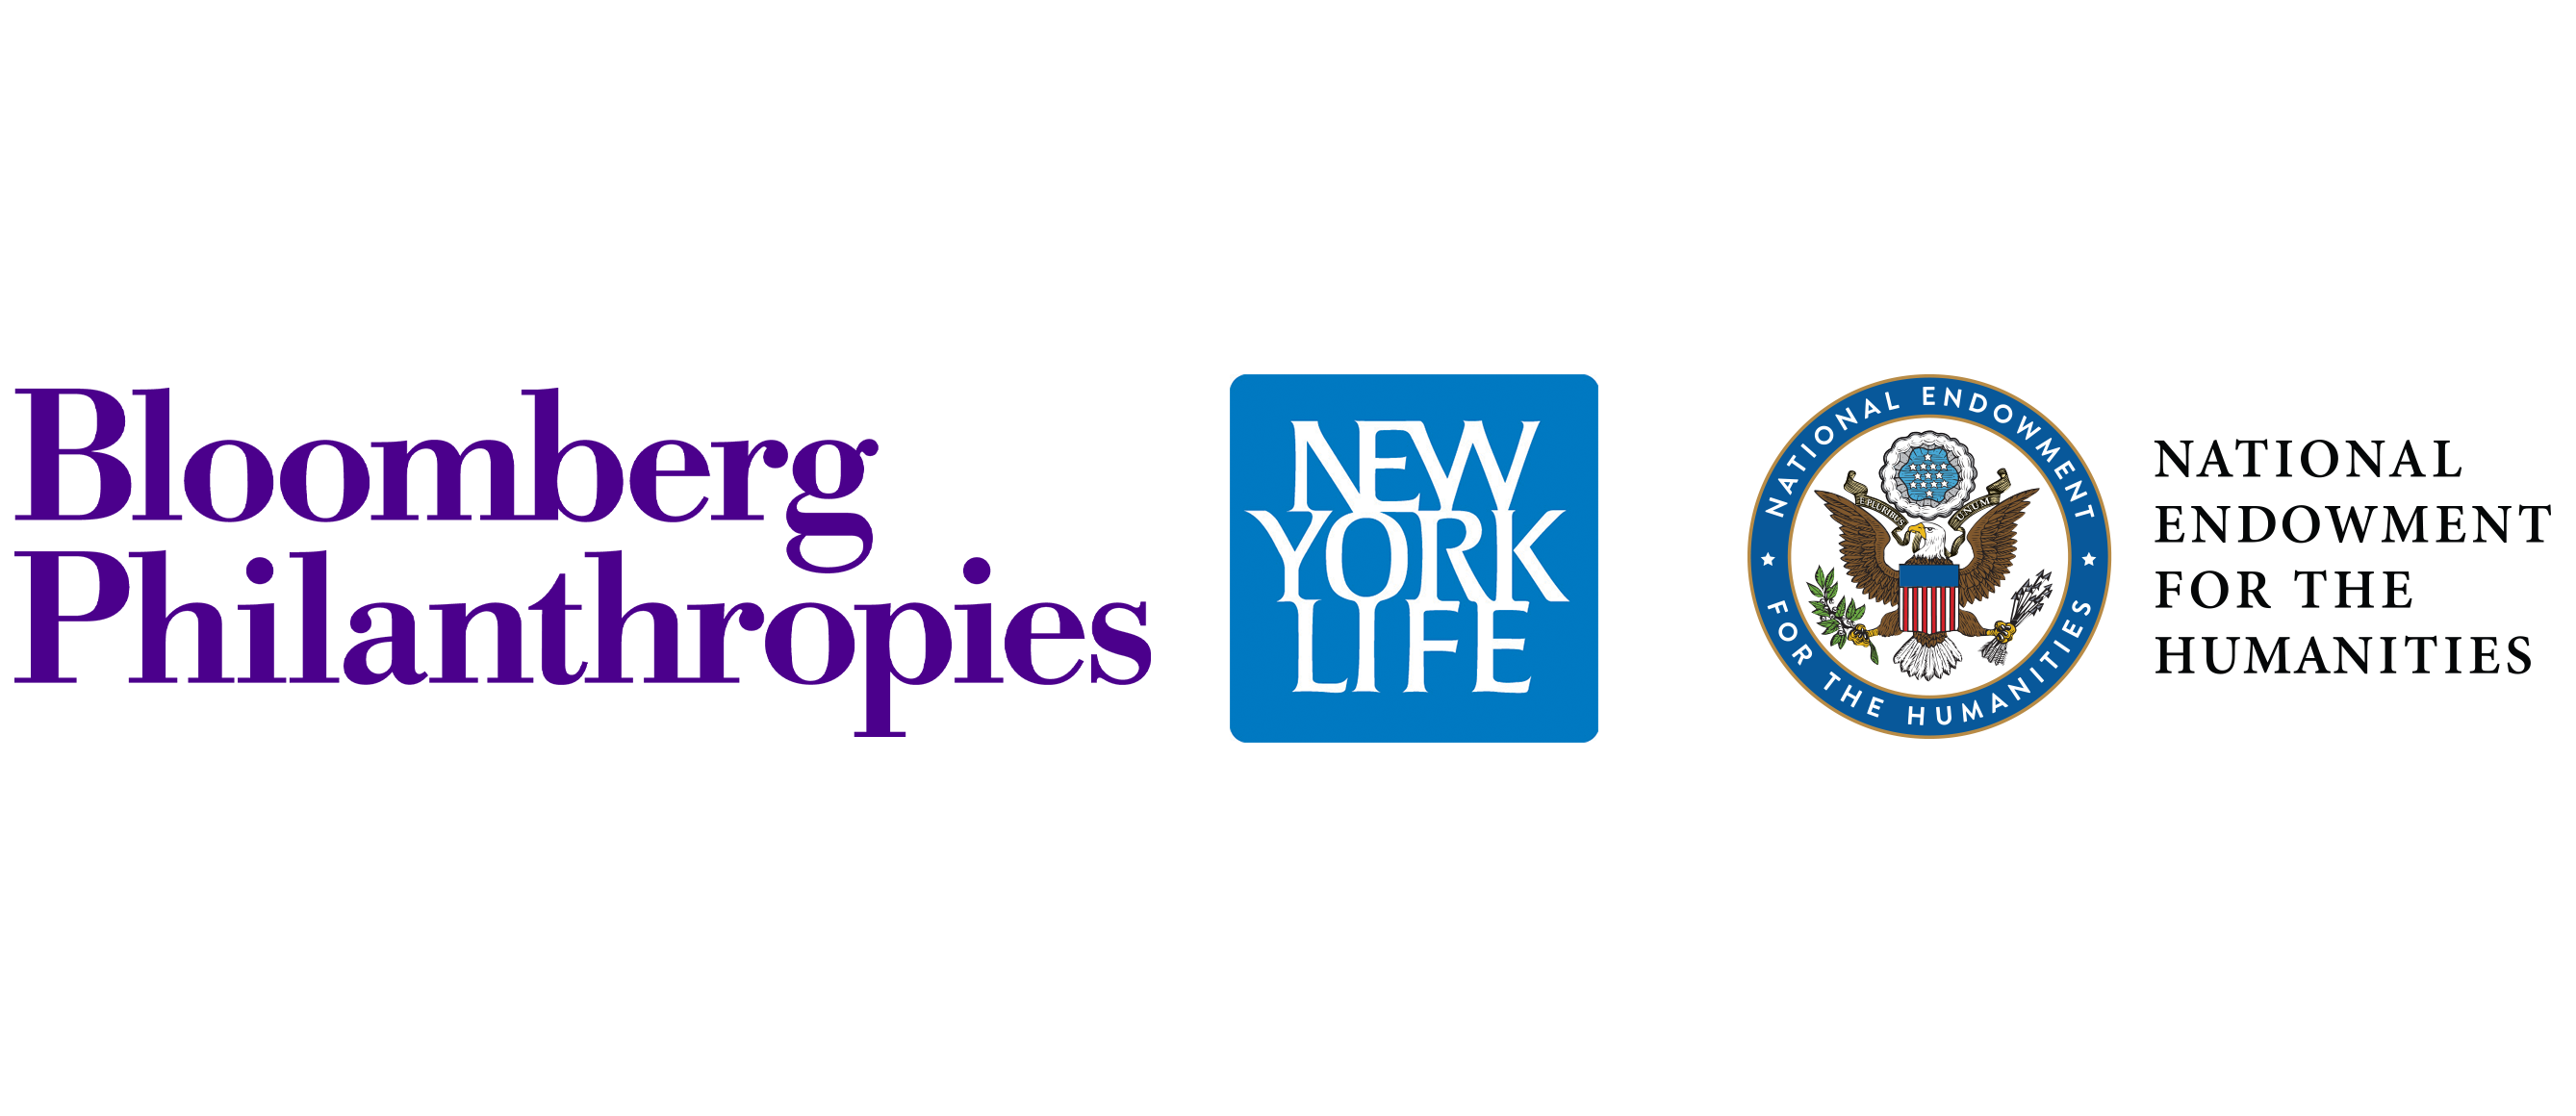 Logos pour Bloomberg Philanthropies, New York Life et le National Endowment for the Humanities.